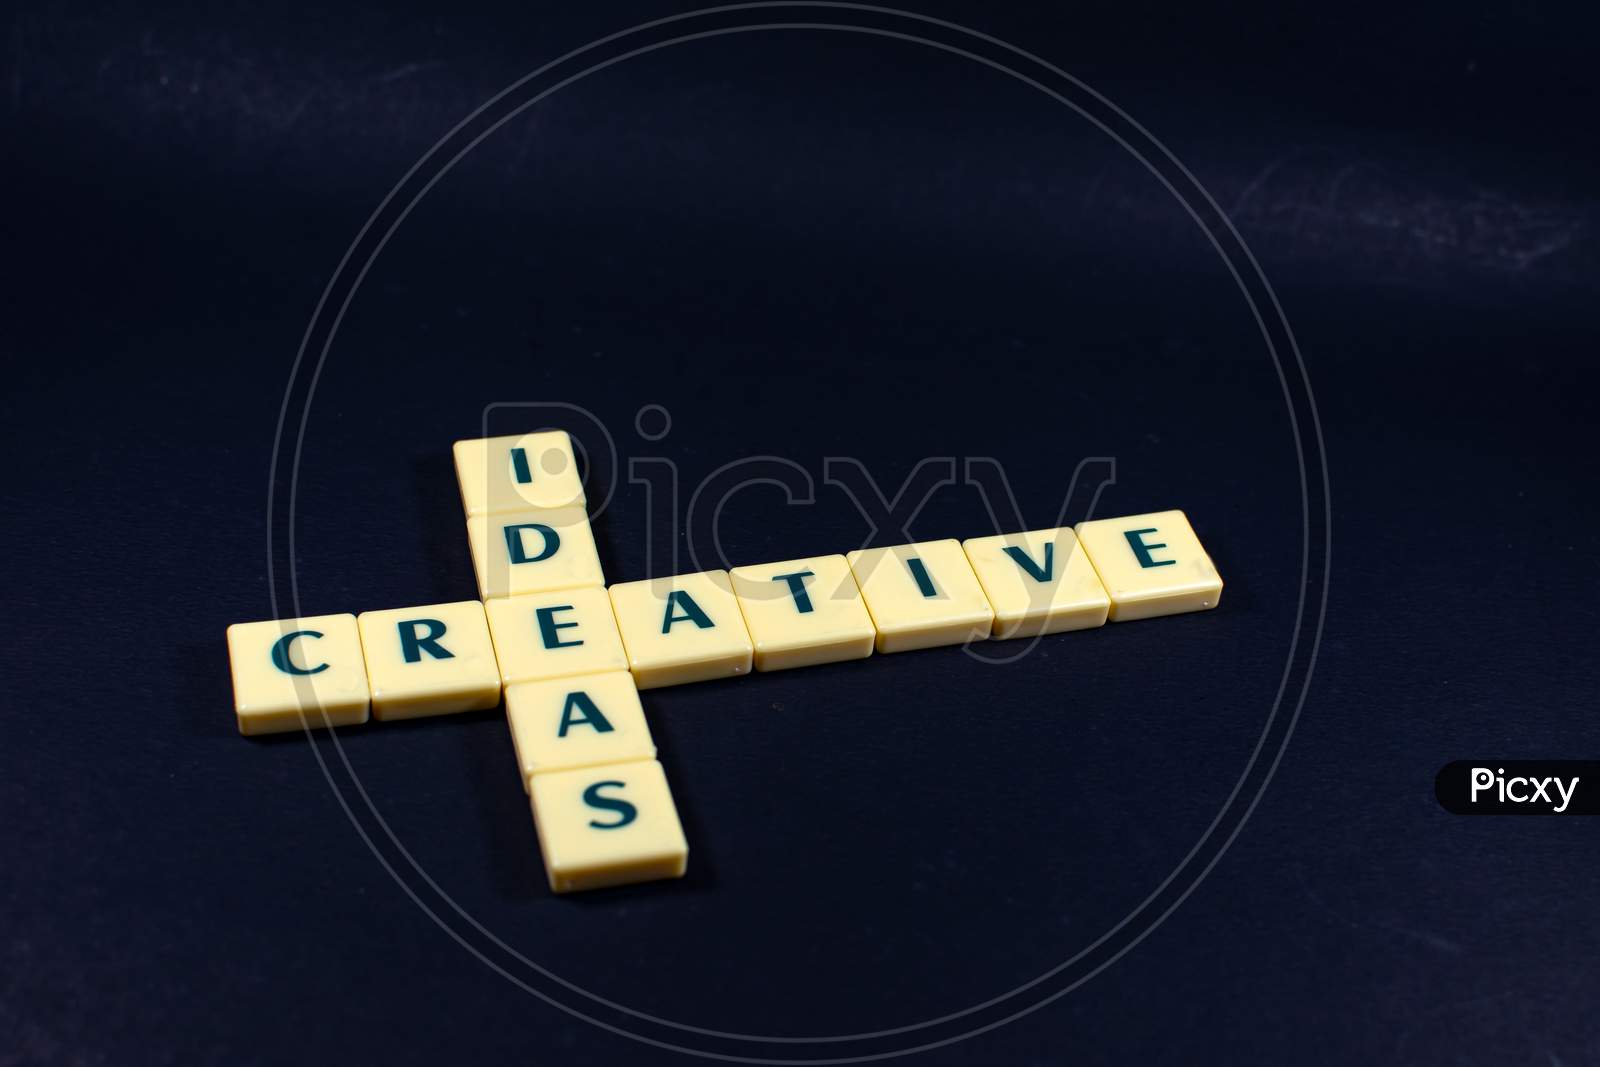 Creative Ideas word concept black texture background image using by block letter for English language learning concept